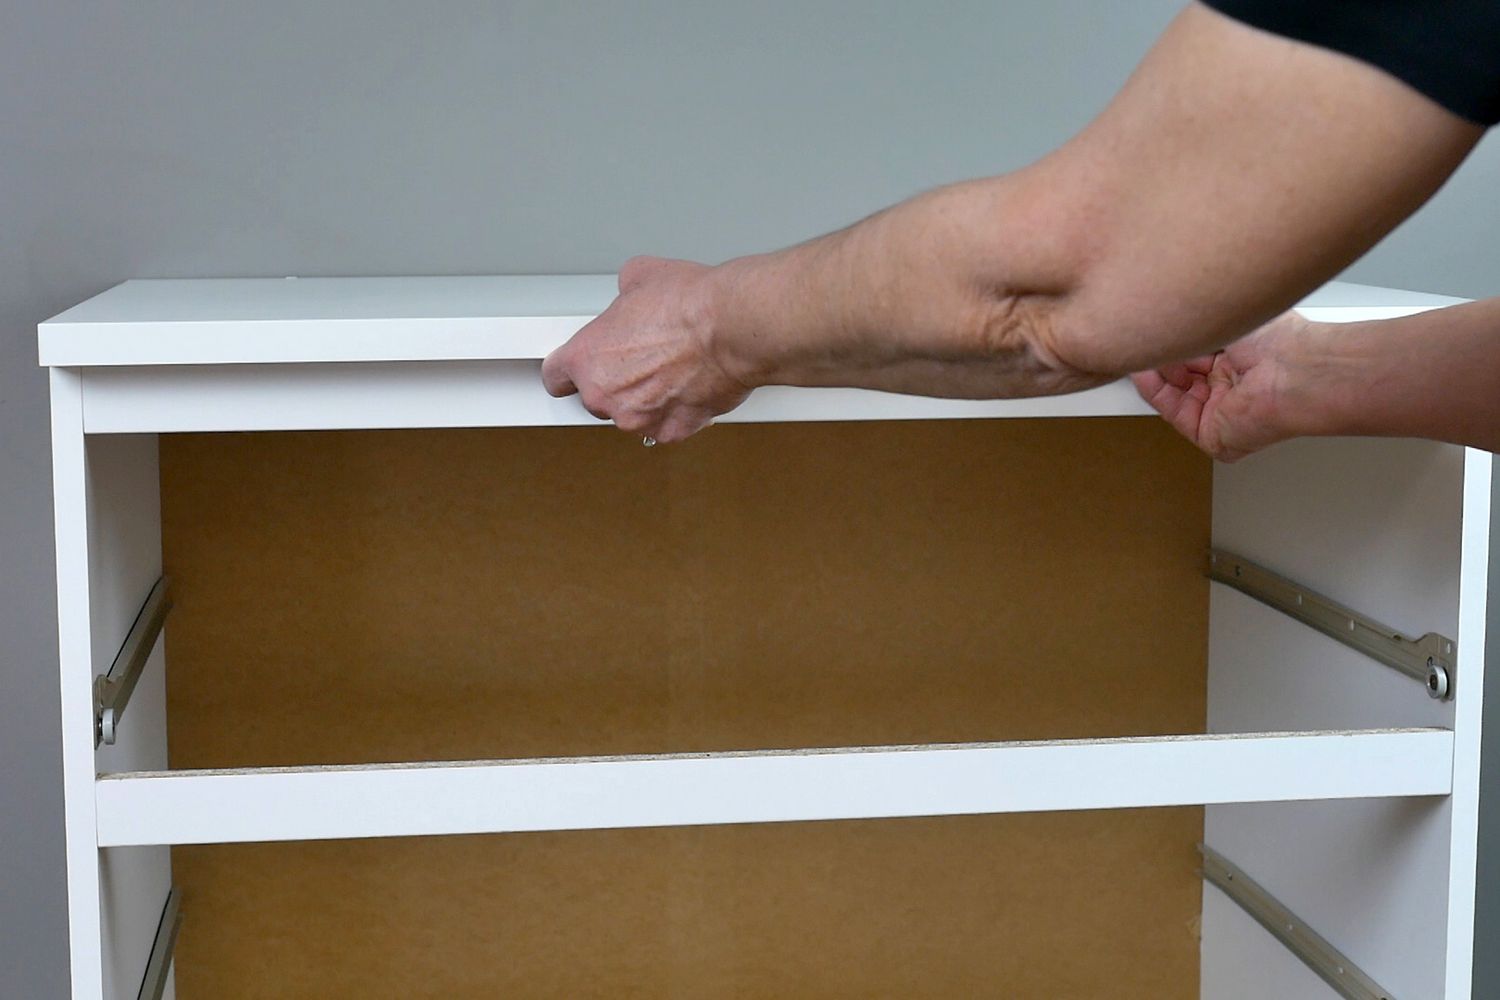 How To Secure A Dresser To The Wall People Com